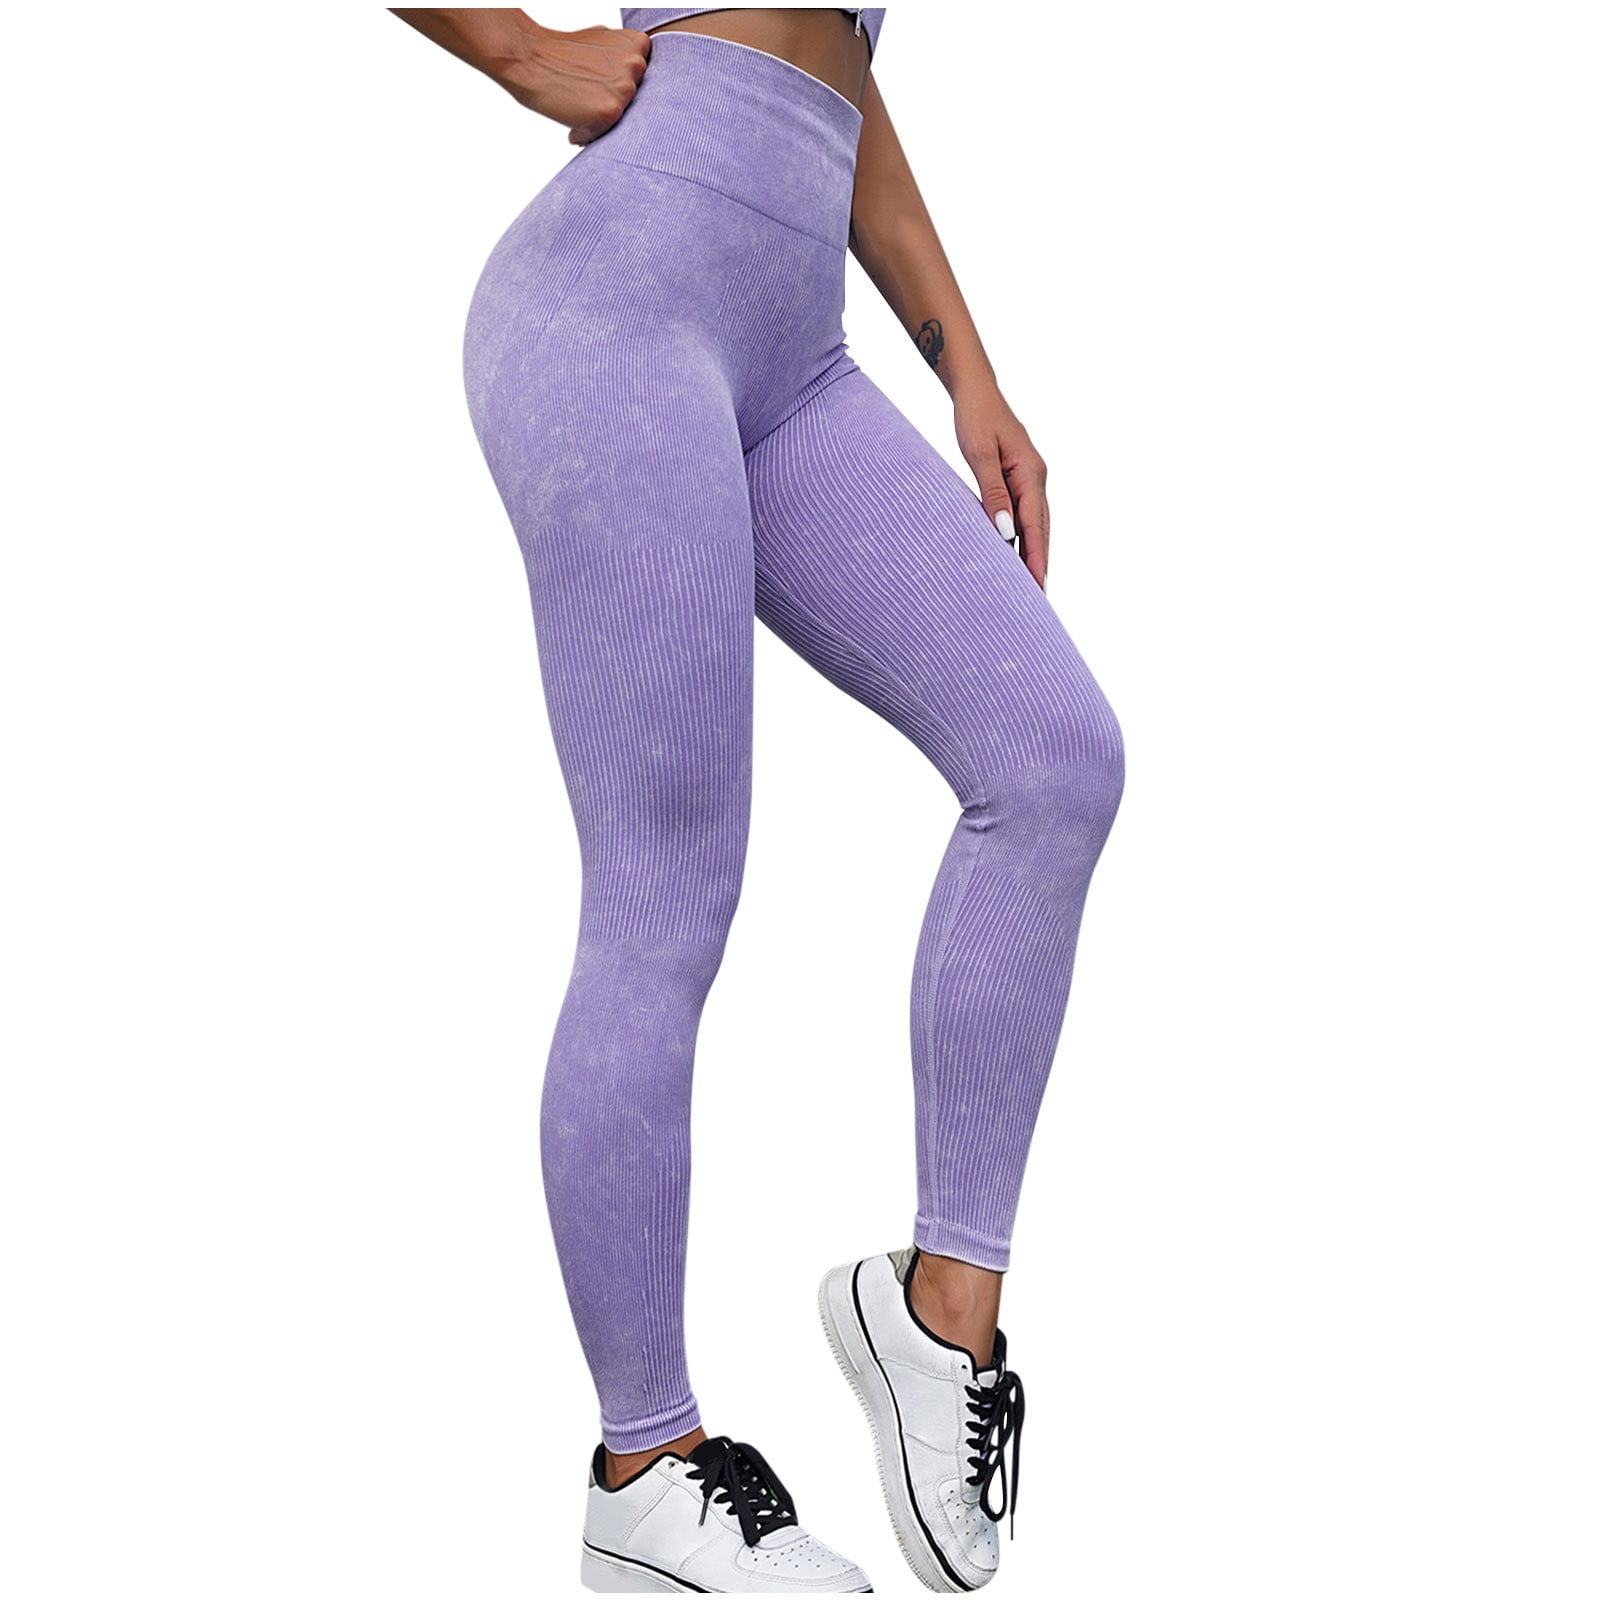 Jalioing Yoga Pants for Women Stretchy High Waist Skinny Ankle